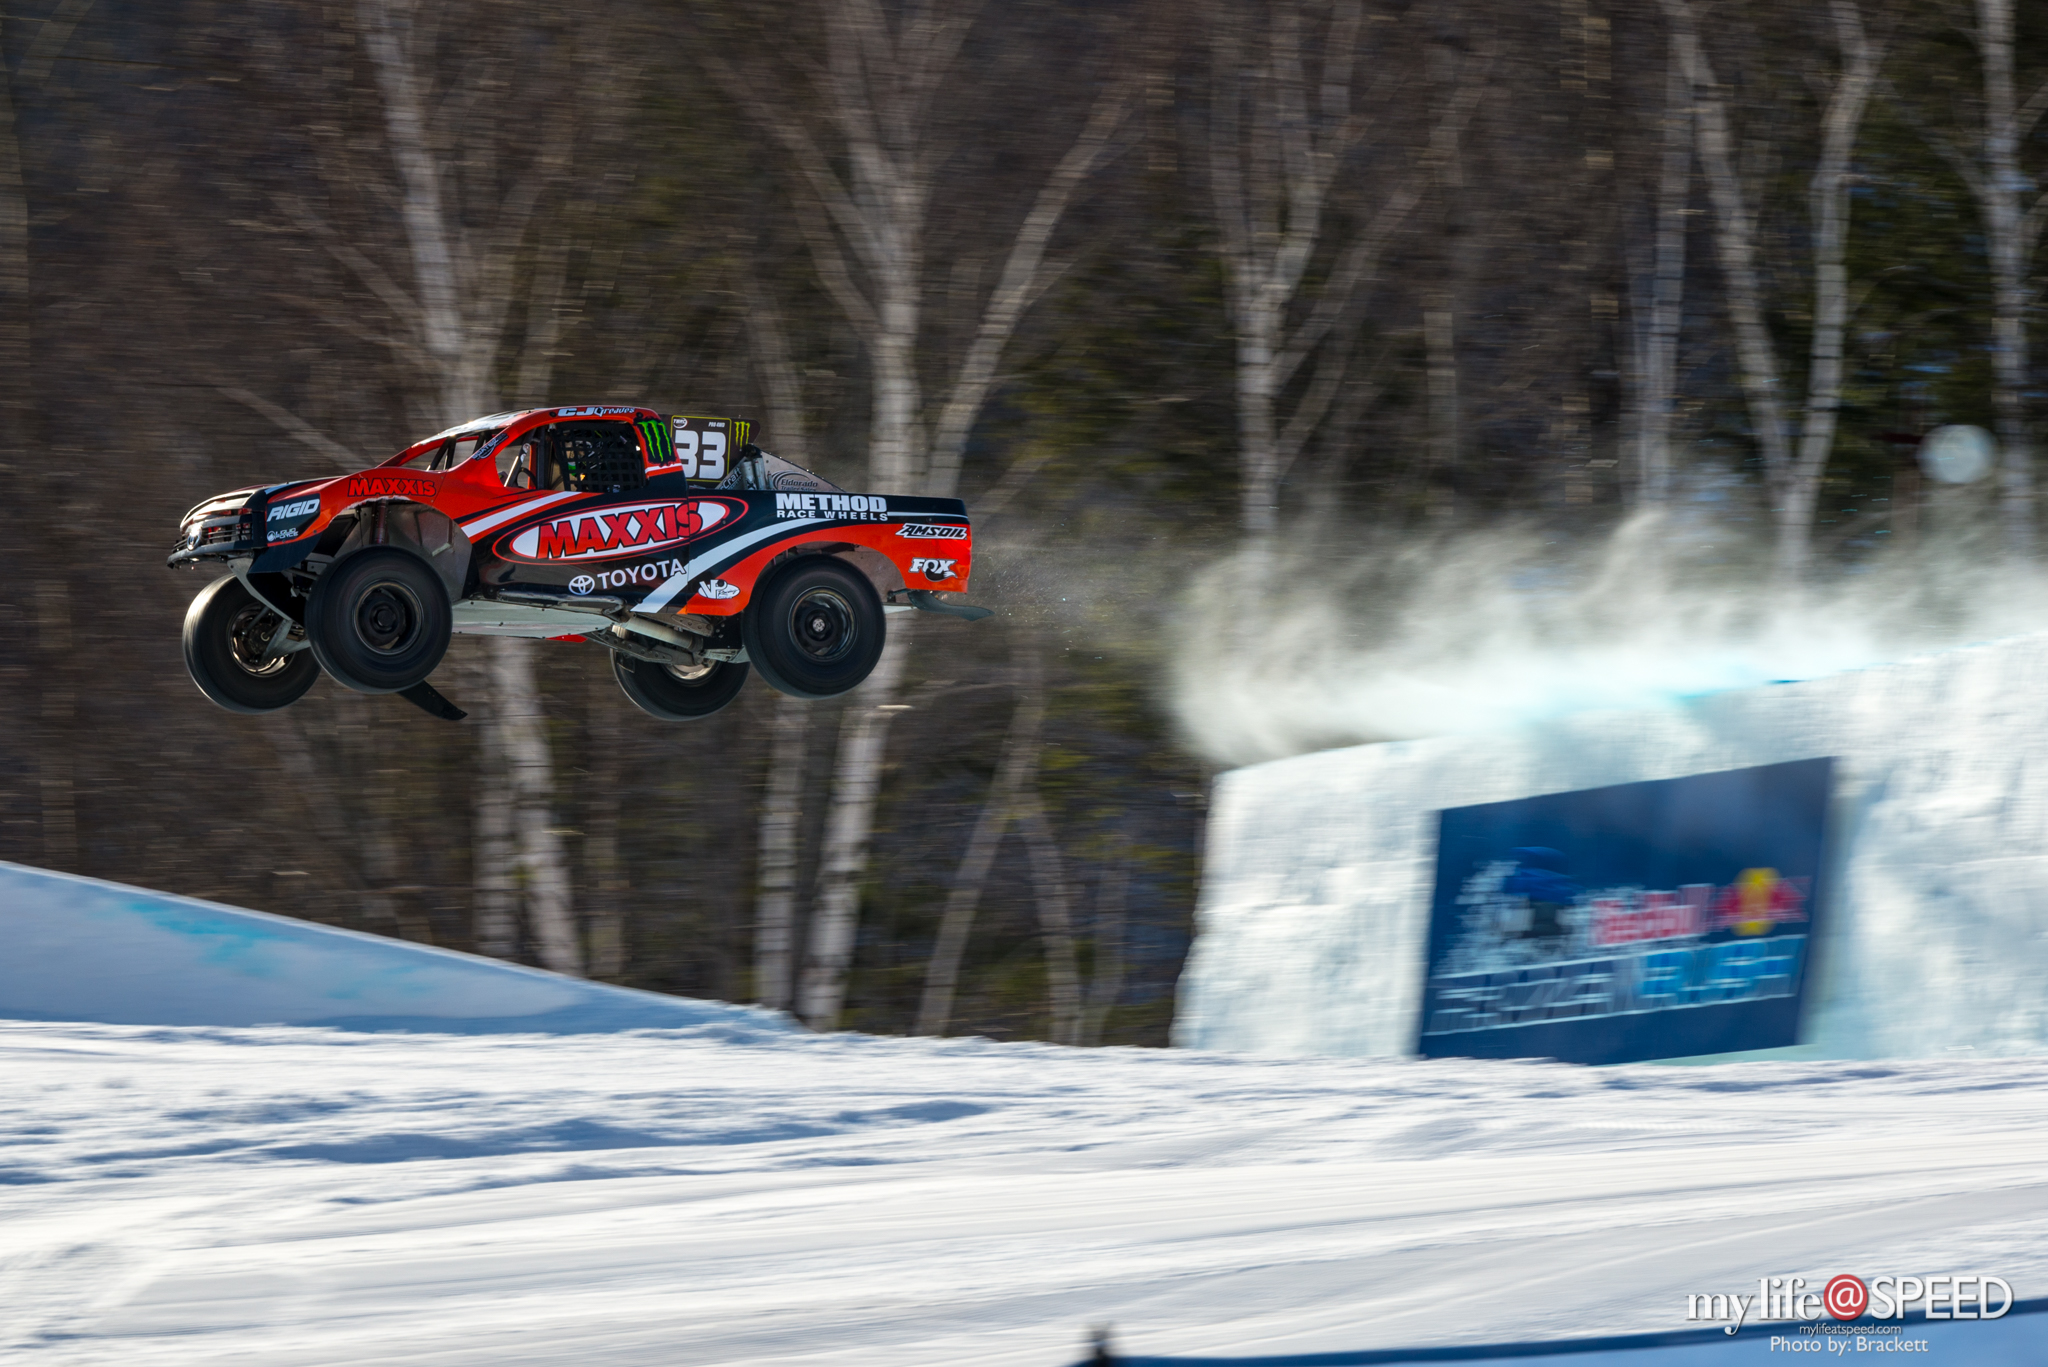 CJ Greaves getting some big air in their fire breathing Toyota. This thing was belching fire every other second. It was awesome!